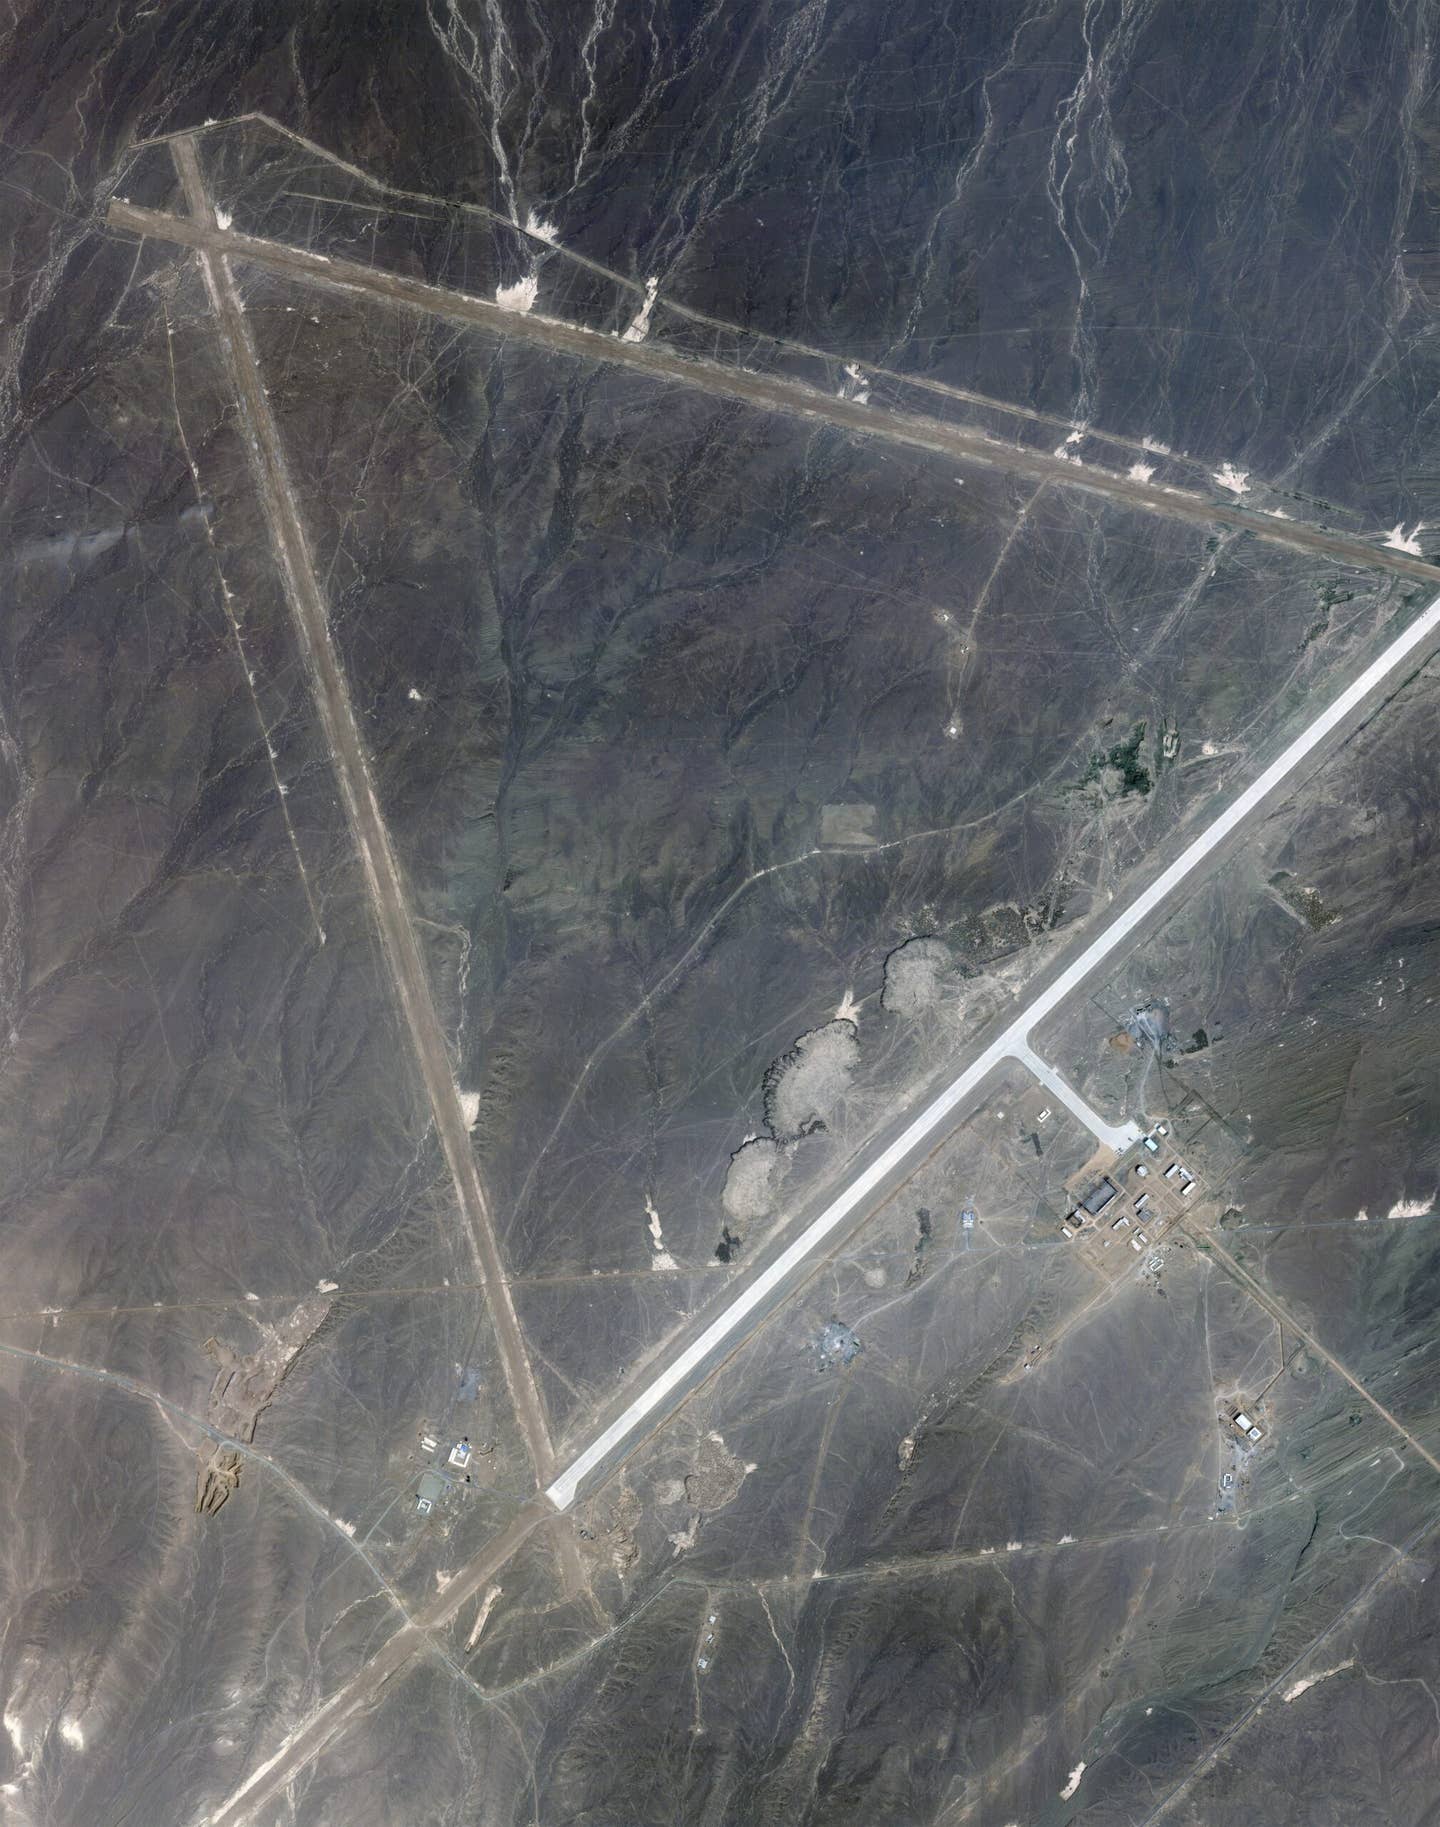 The mysterious massive runway near Lop Nor that may have been used to recover the spaceplane after its latest mission, seen in a satellite image dated May 1, 2022.&nbsp;<em>PHOTO © 2022 PLANET LABS INC. ALL RIGHTS RESERVED. REPRINTED BY PERMISSION</em>